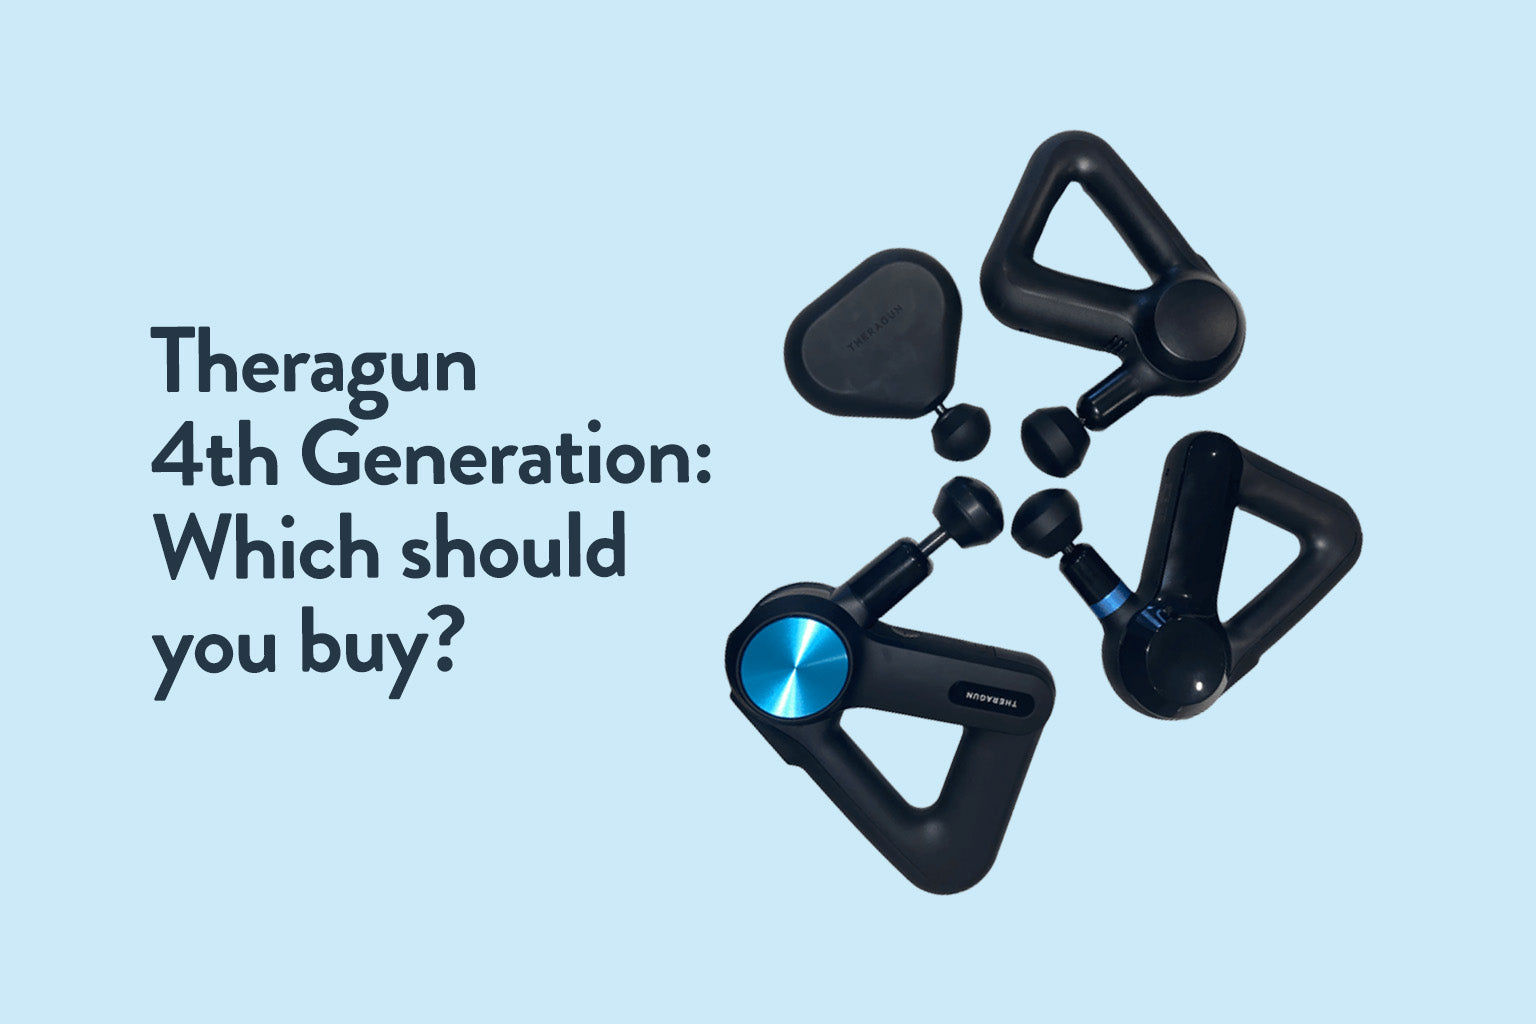 Theragun Singapore Buying Guide: Which should you buy?